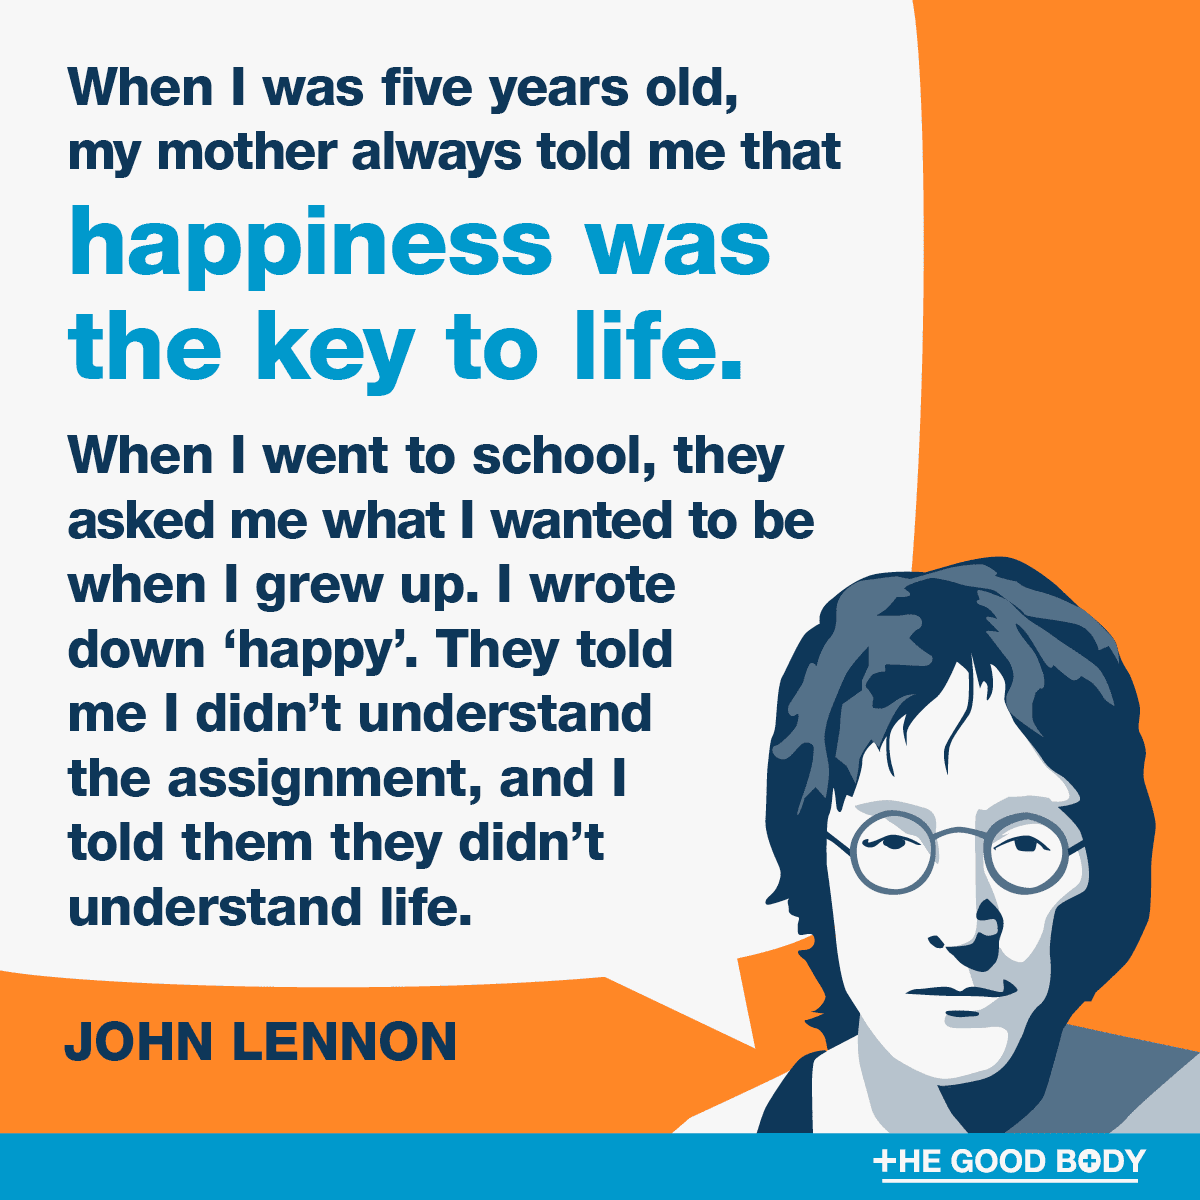 Quotes about Mental Health #5 by John Lennon